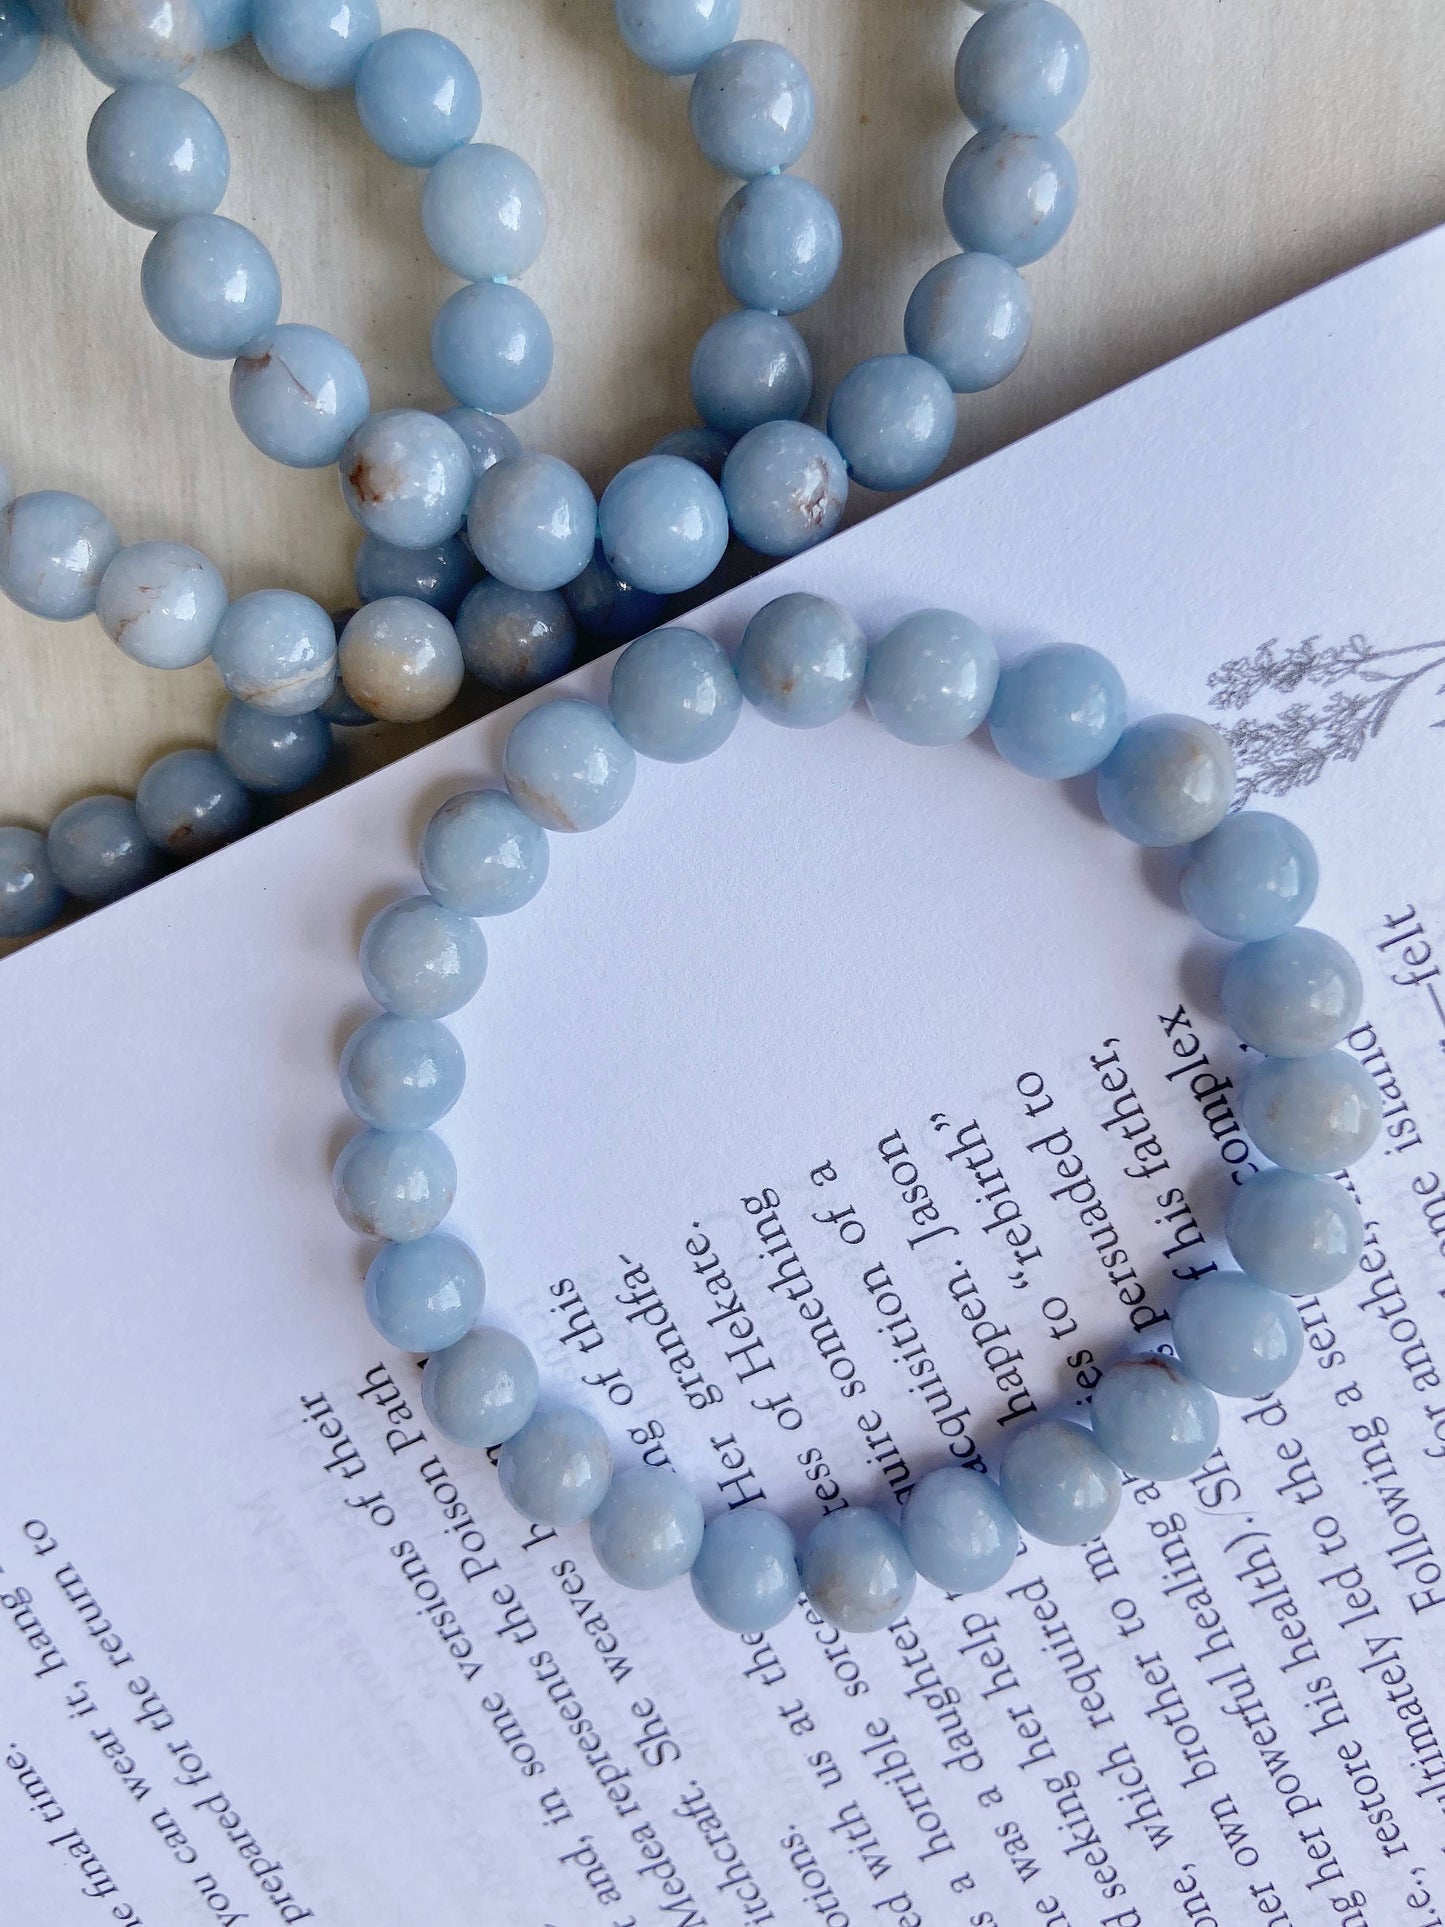 Angelite Bead Bracelet -- Stone to Connect with Spirit Guides